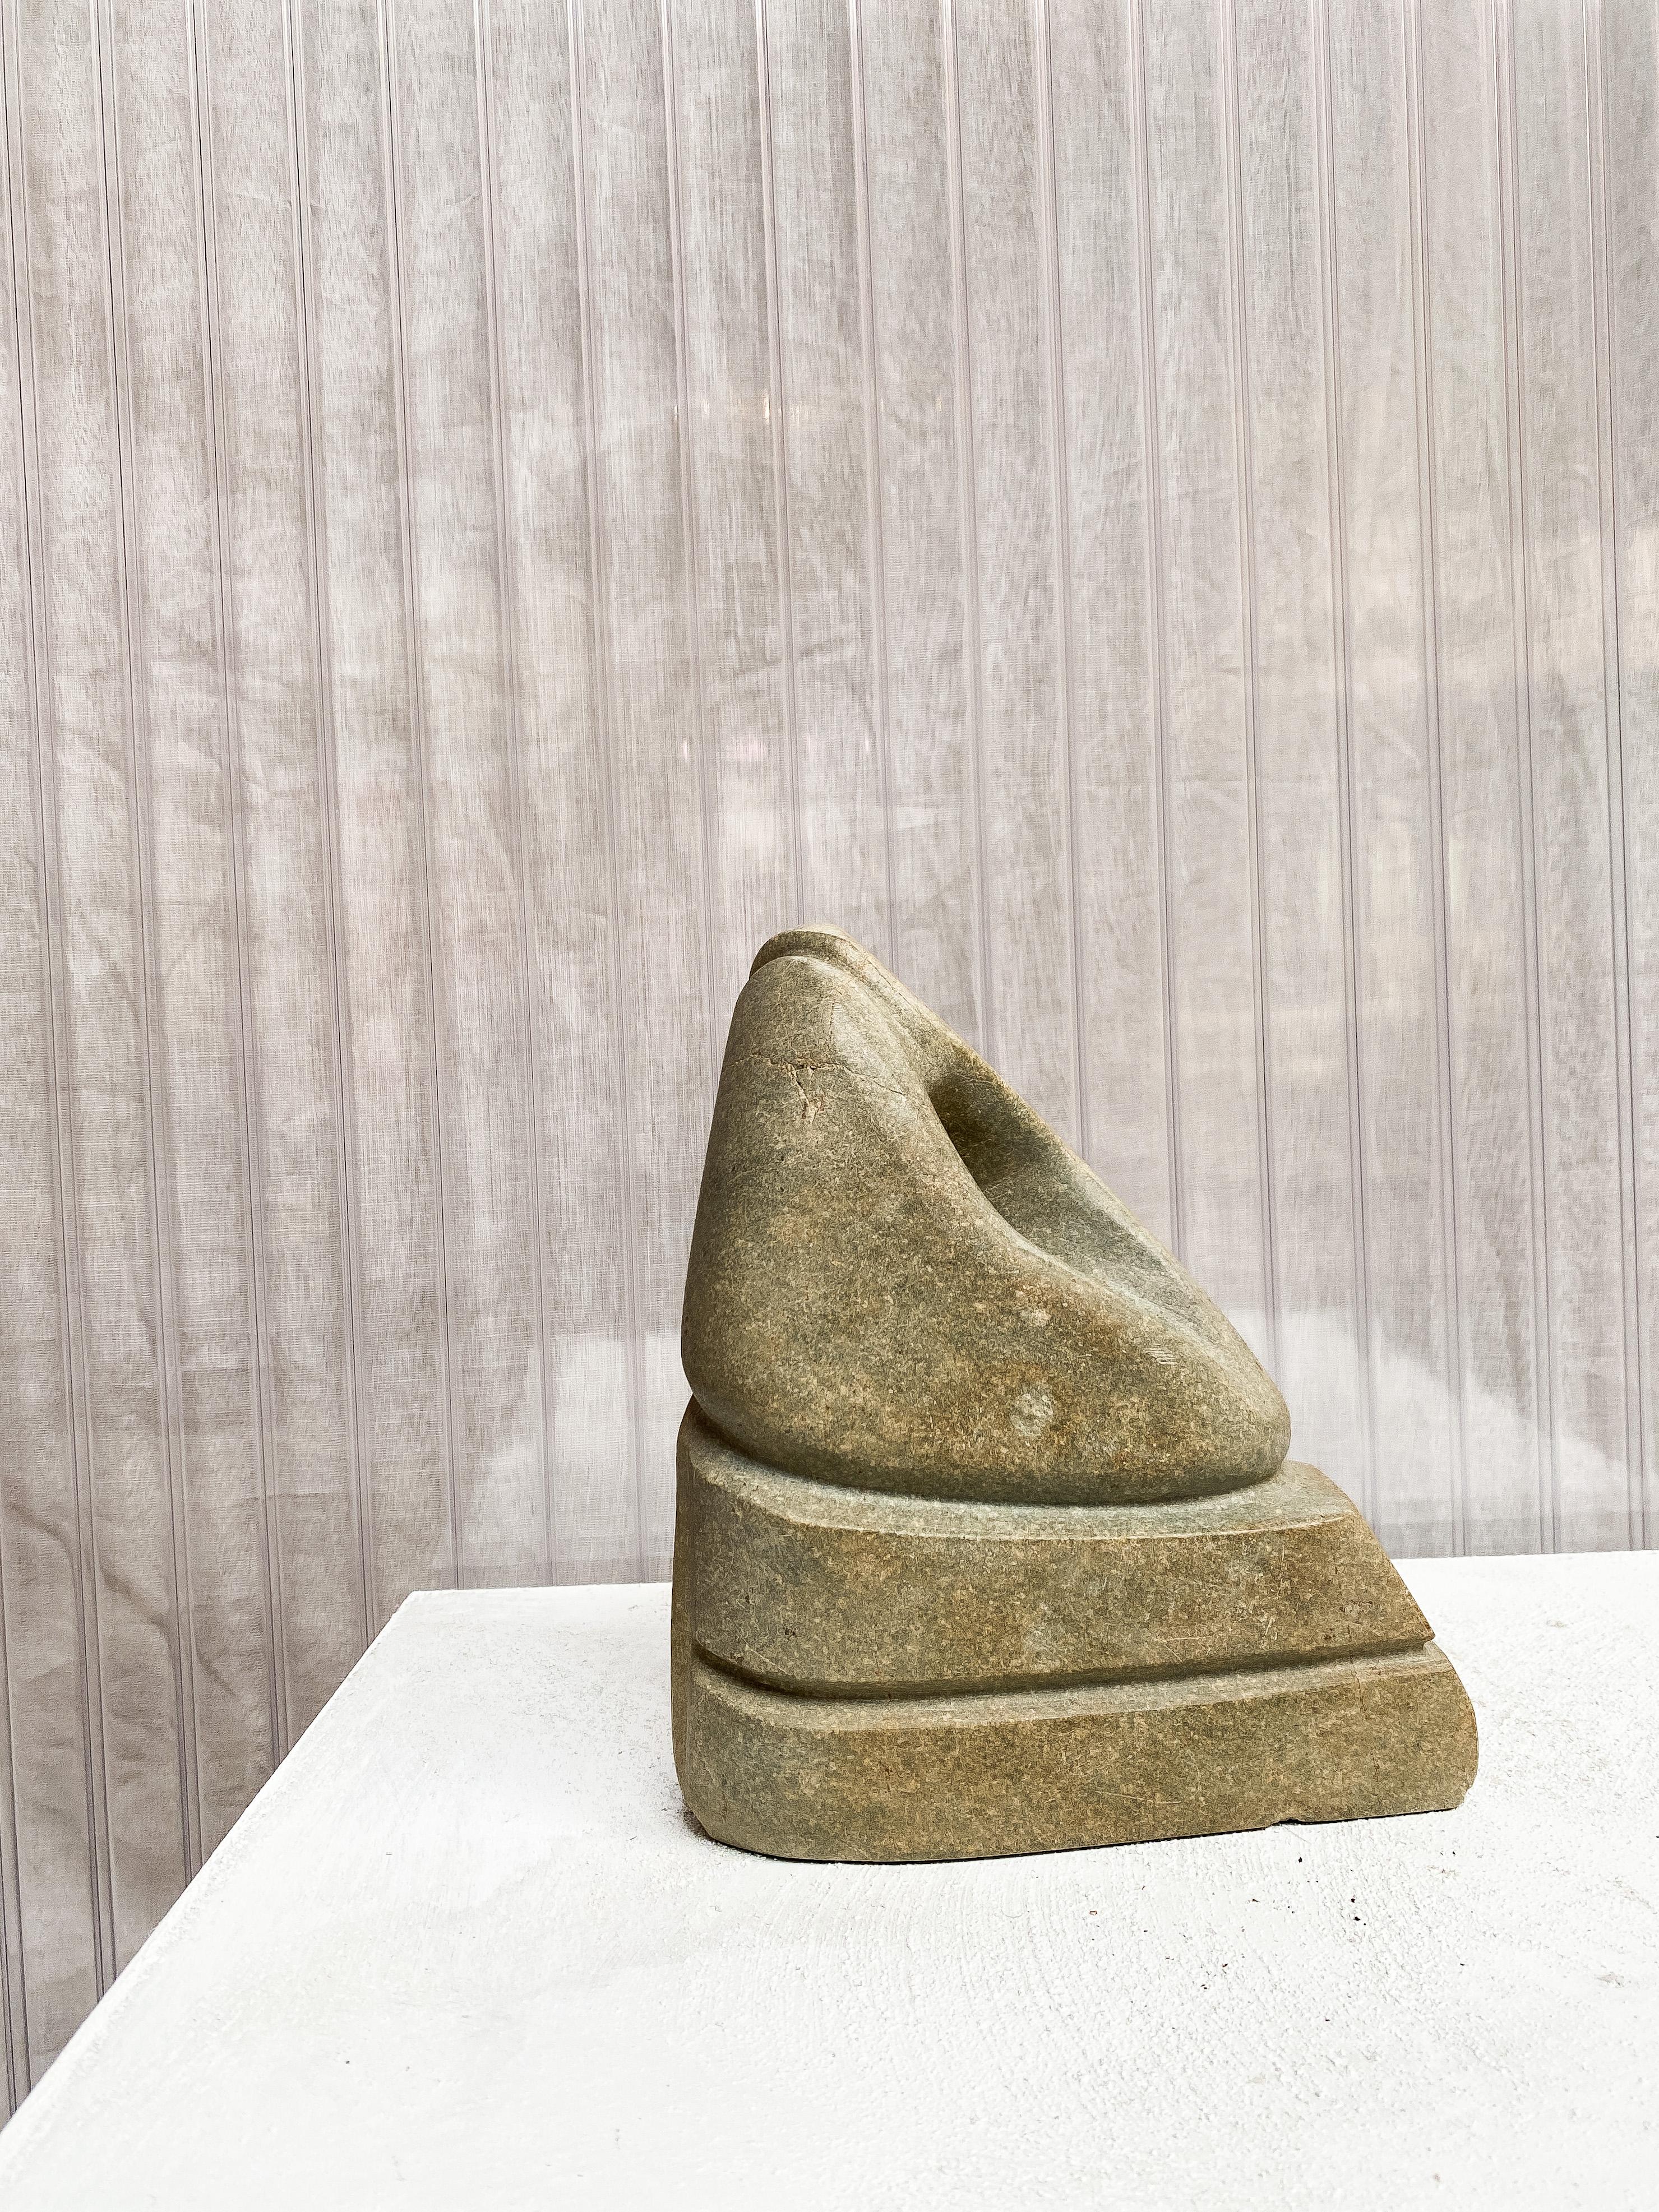 Interesting modernist stone sculpture in an organic abstract shape. Green & greenish toned stone. 
The piece is interestingly carved on all sides, making it a beautiful freestanding sculpture. Highly decorative and subtle piece, fitting for any